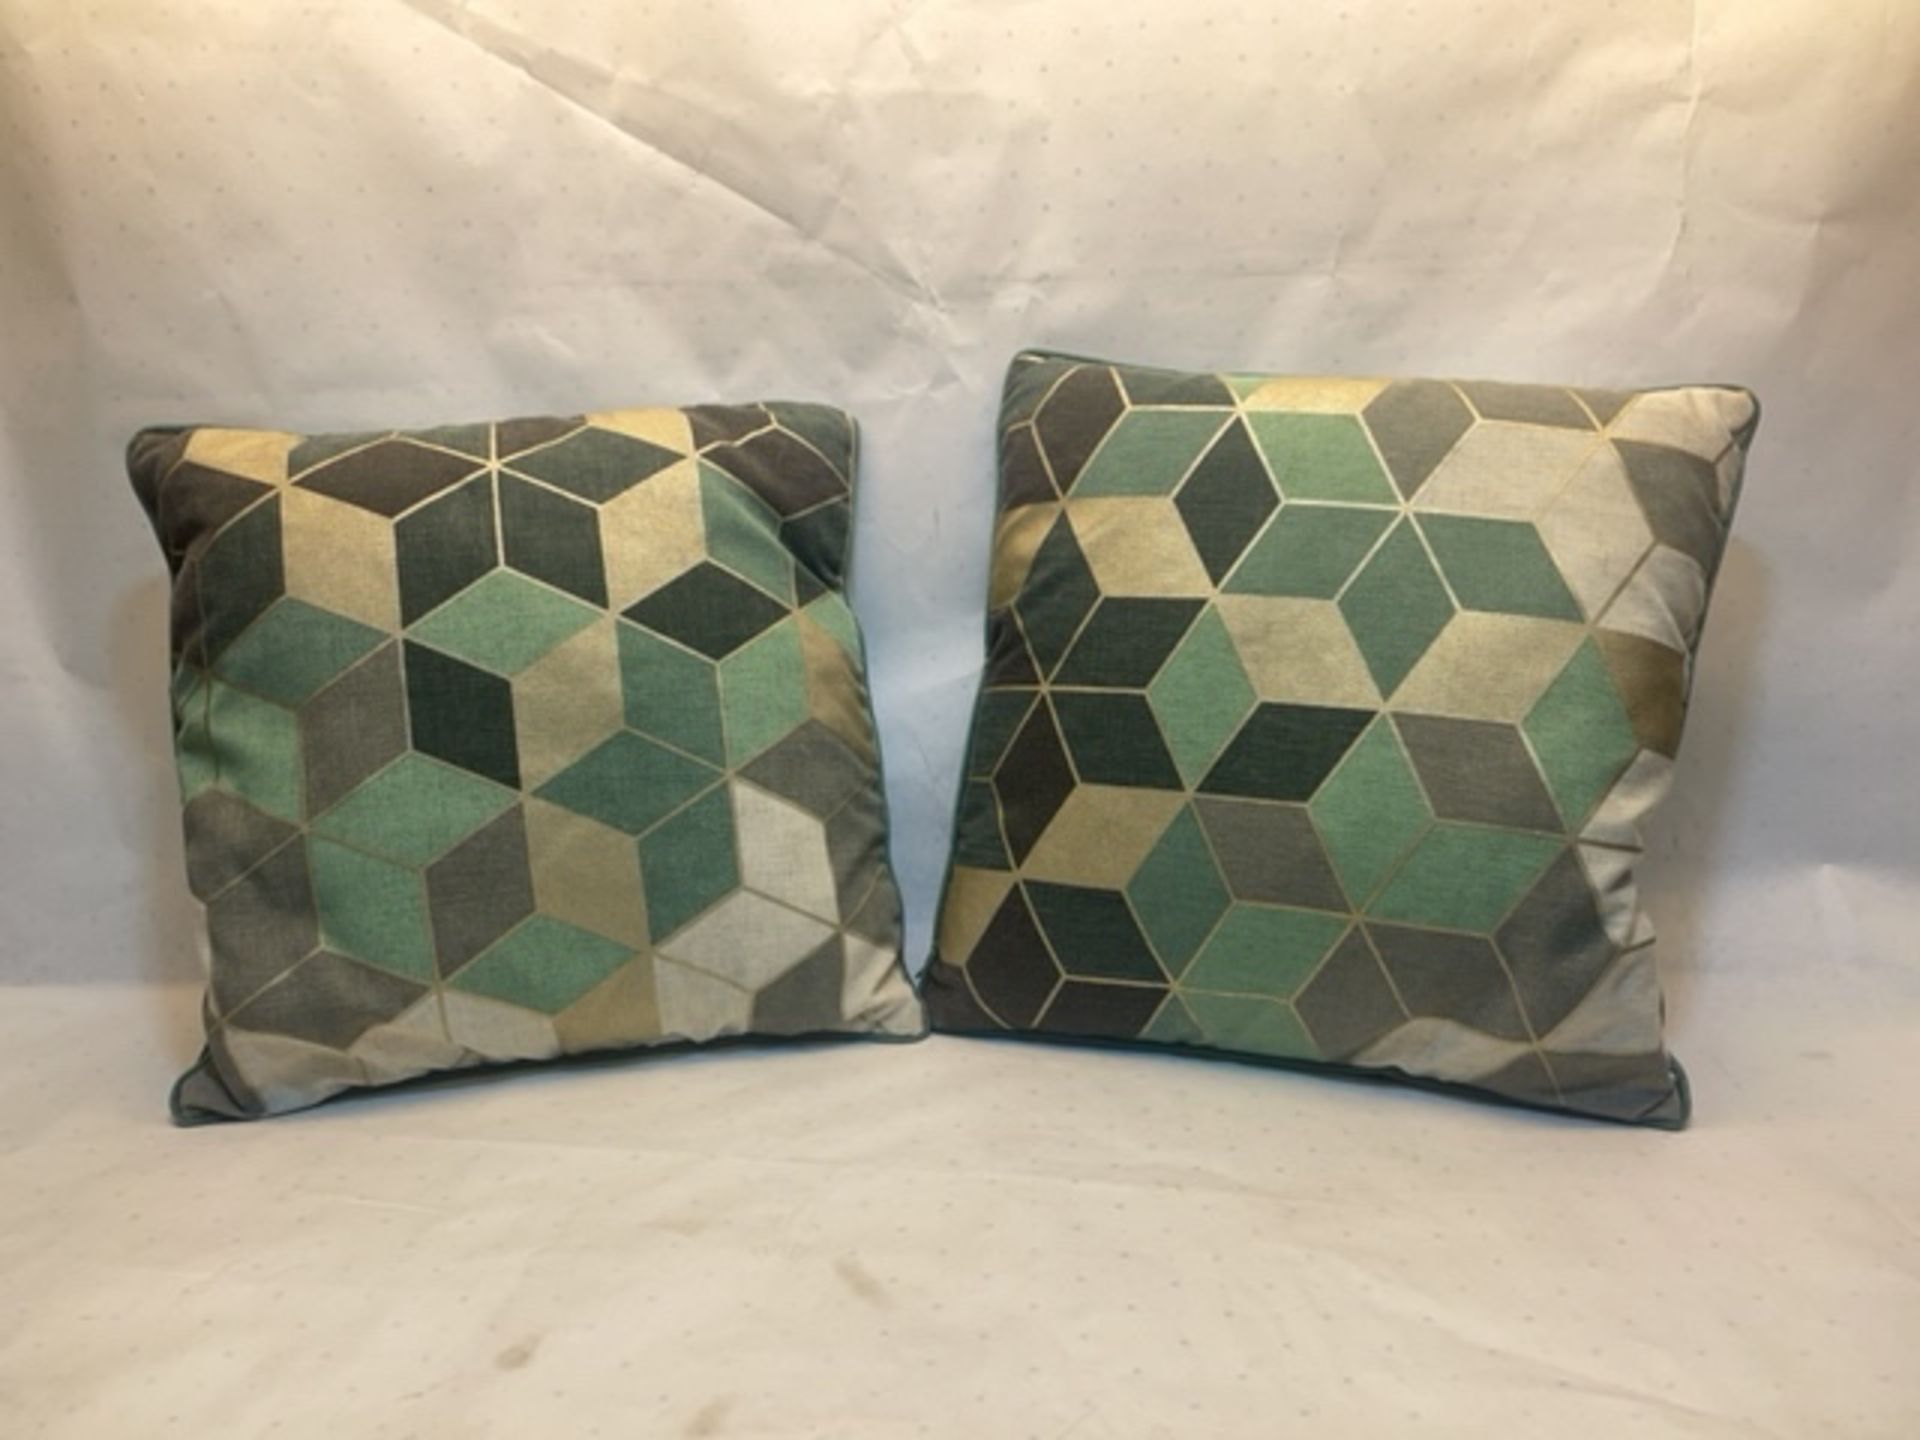 4 x Green Cushions with Geometric Pattern on Front - Image 4 of 6